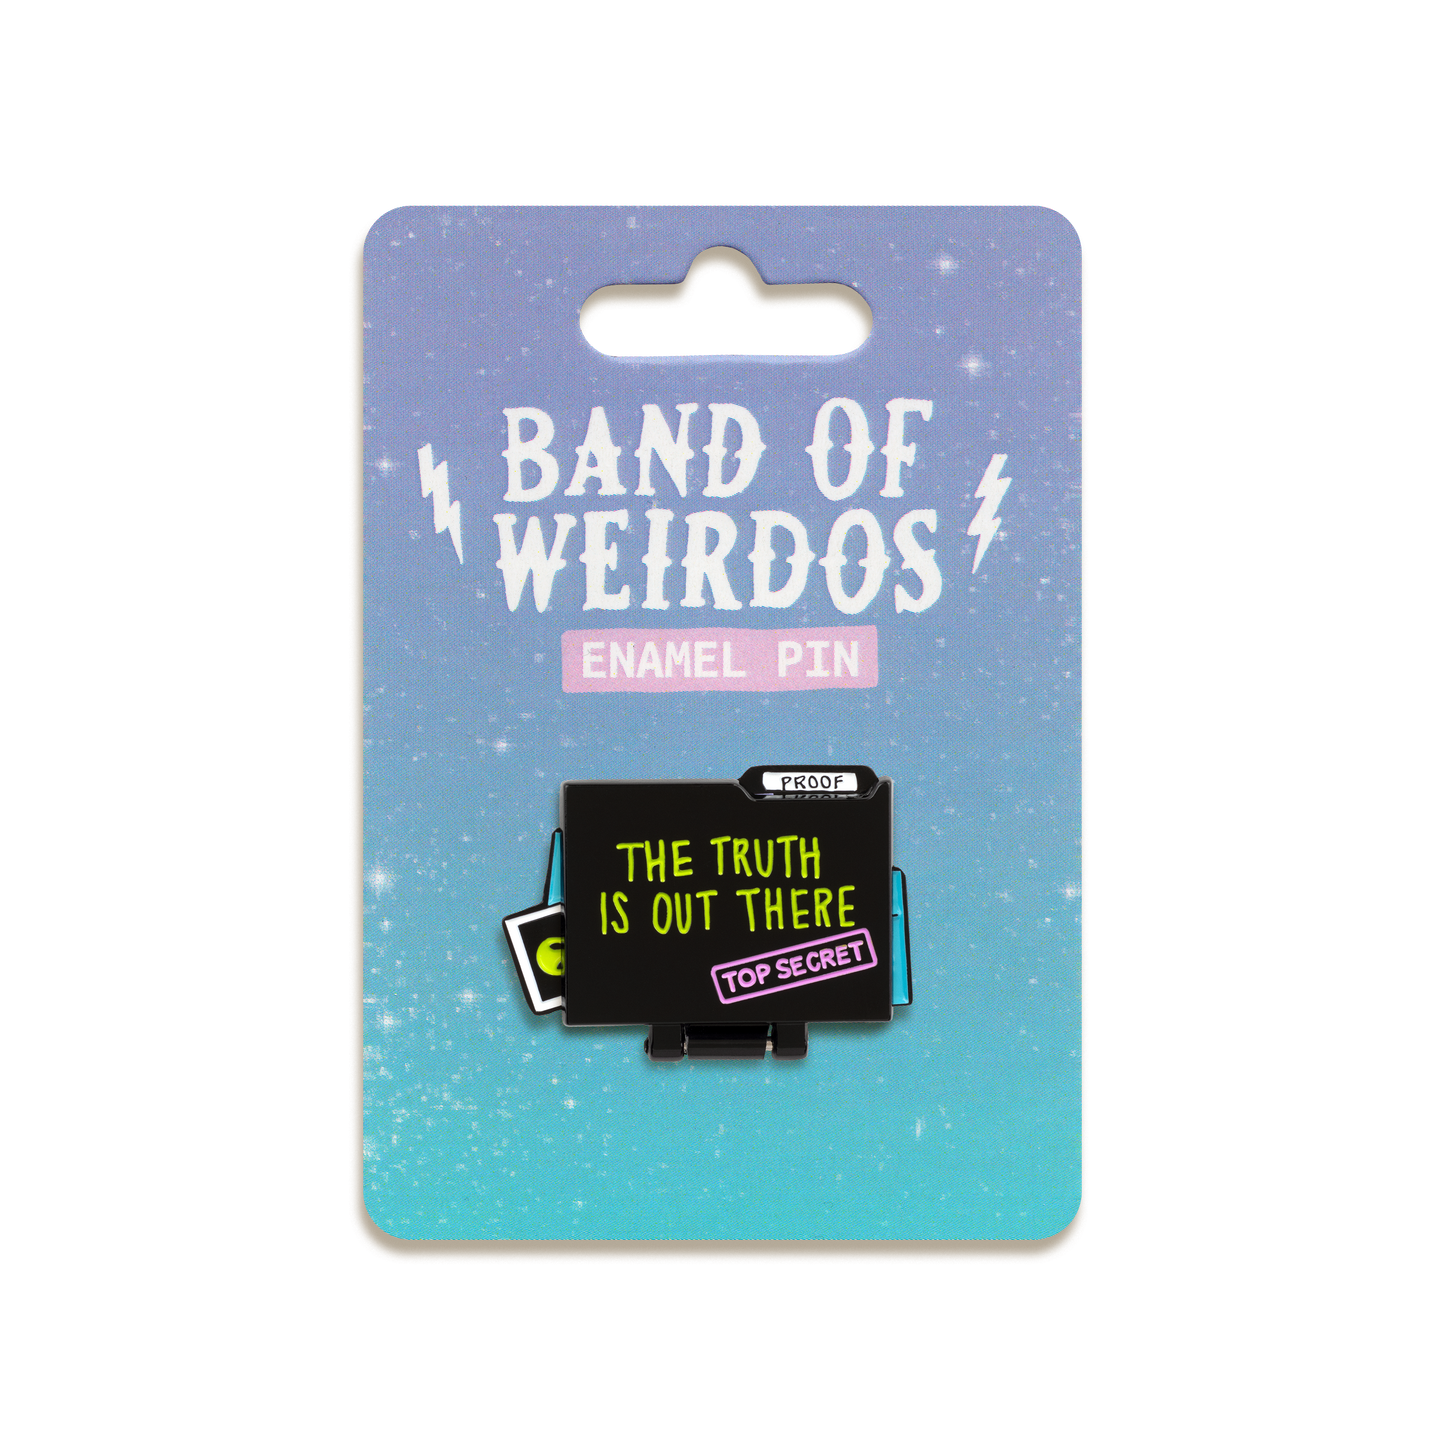 The Truth Is Out There Enamel Pin by Band of Weirdos